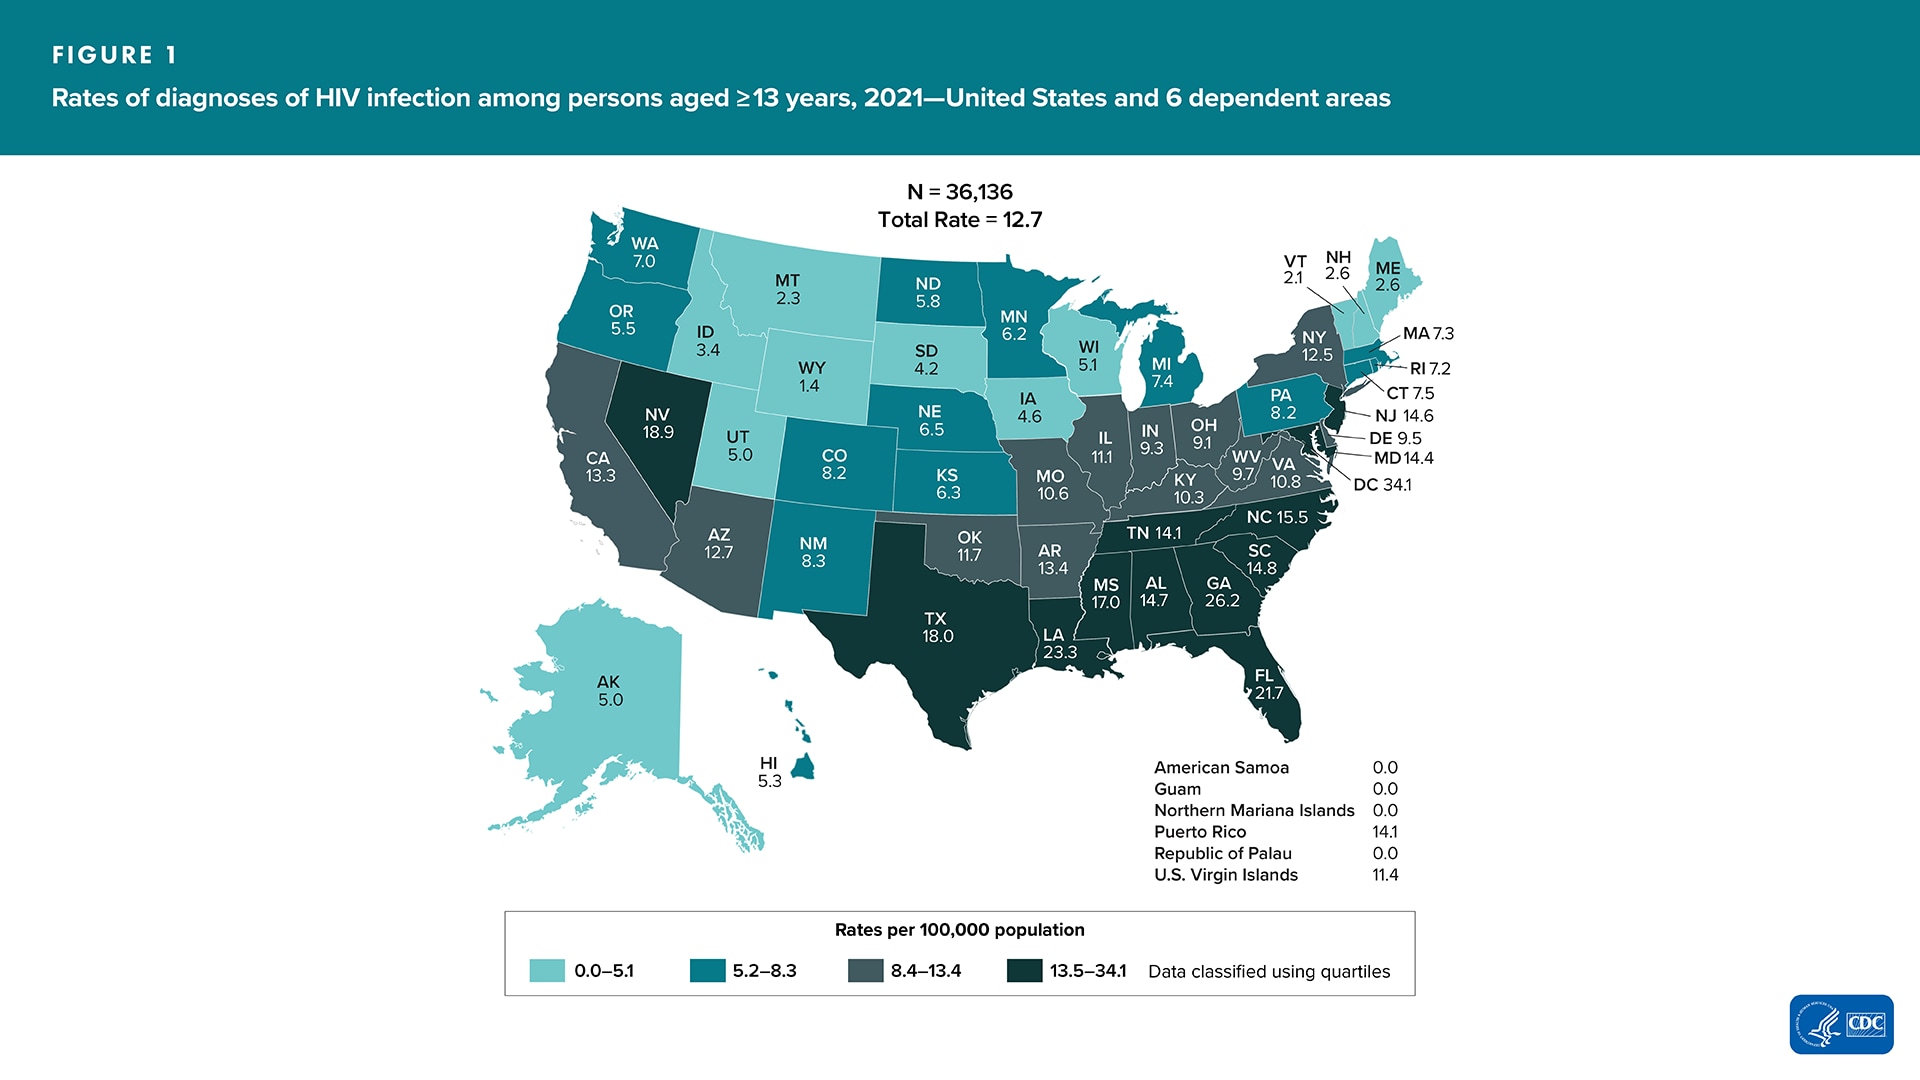 In 2021, in the United States and 6 dependent areas, there were 36,136 HIV diagnoses (rate: 12.7 per 100,000) among persons aged ≥13 years.